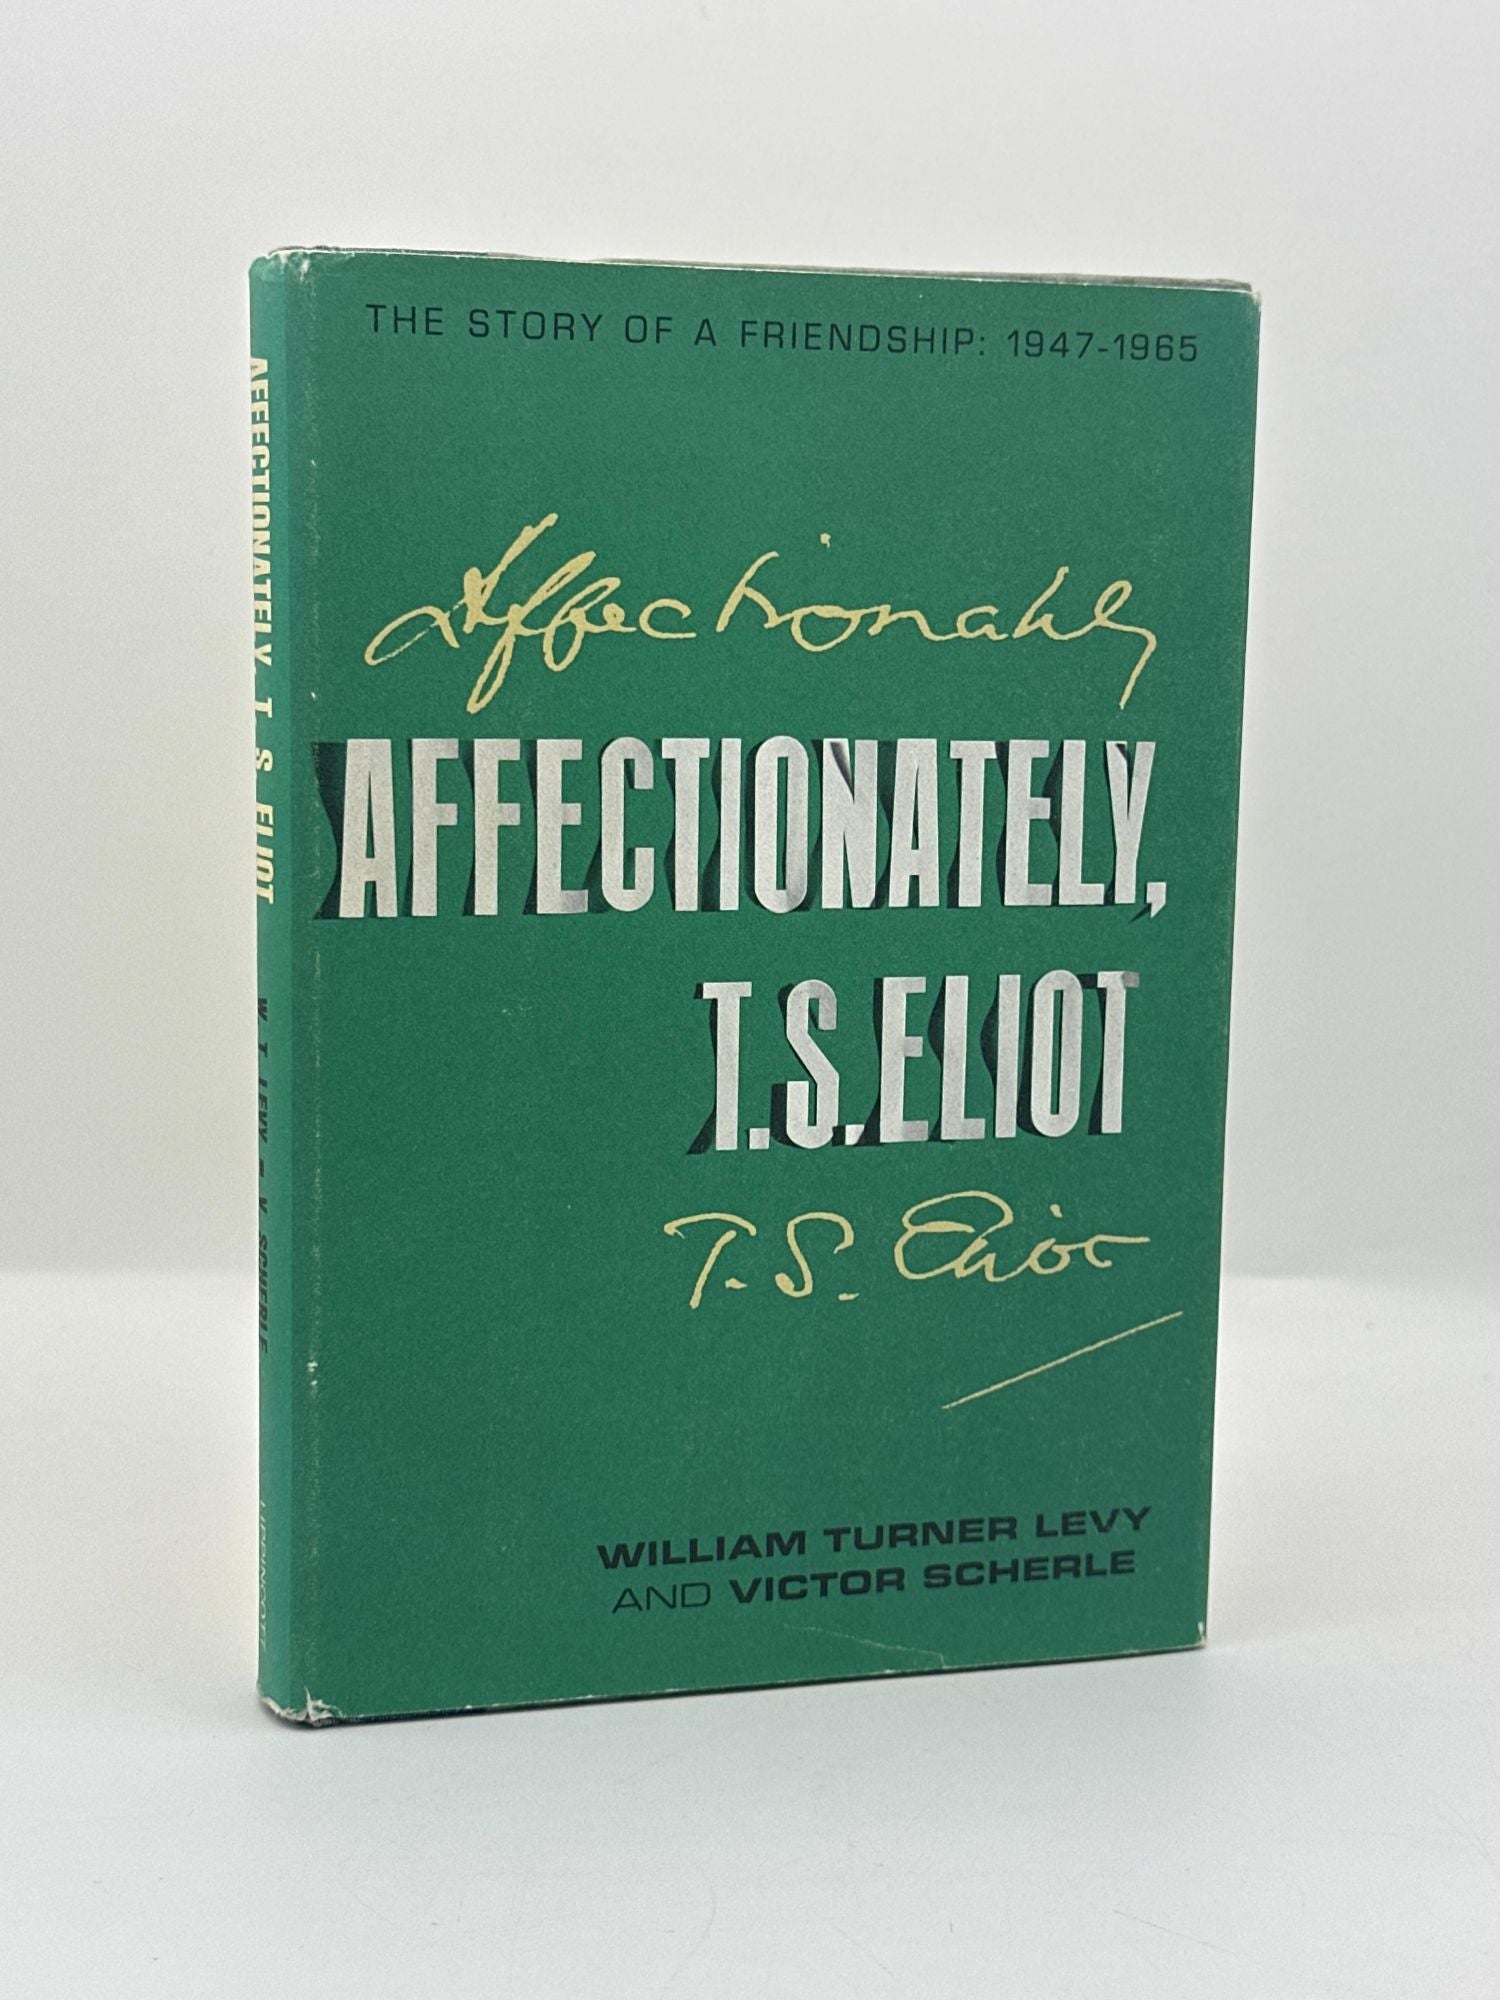 Affectionately, T.S. Eliot: The Story of Friendship 1947-1965. William Turner Levy, Victor Scherle.